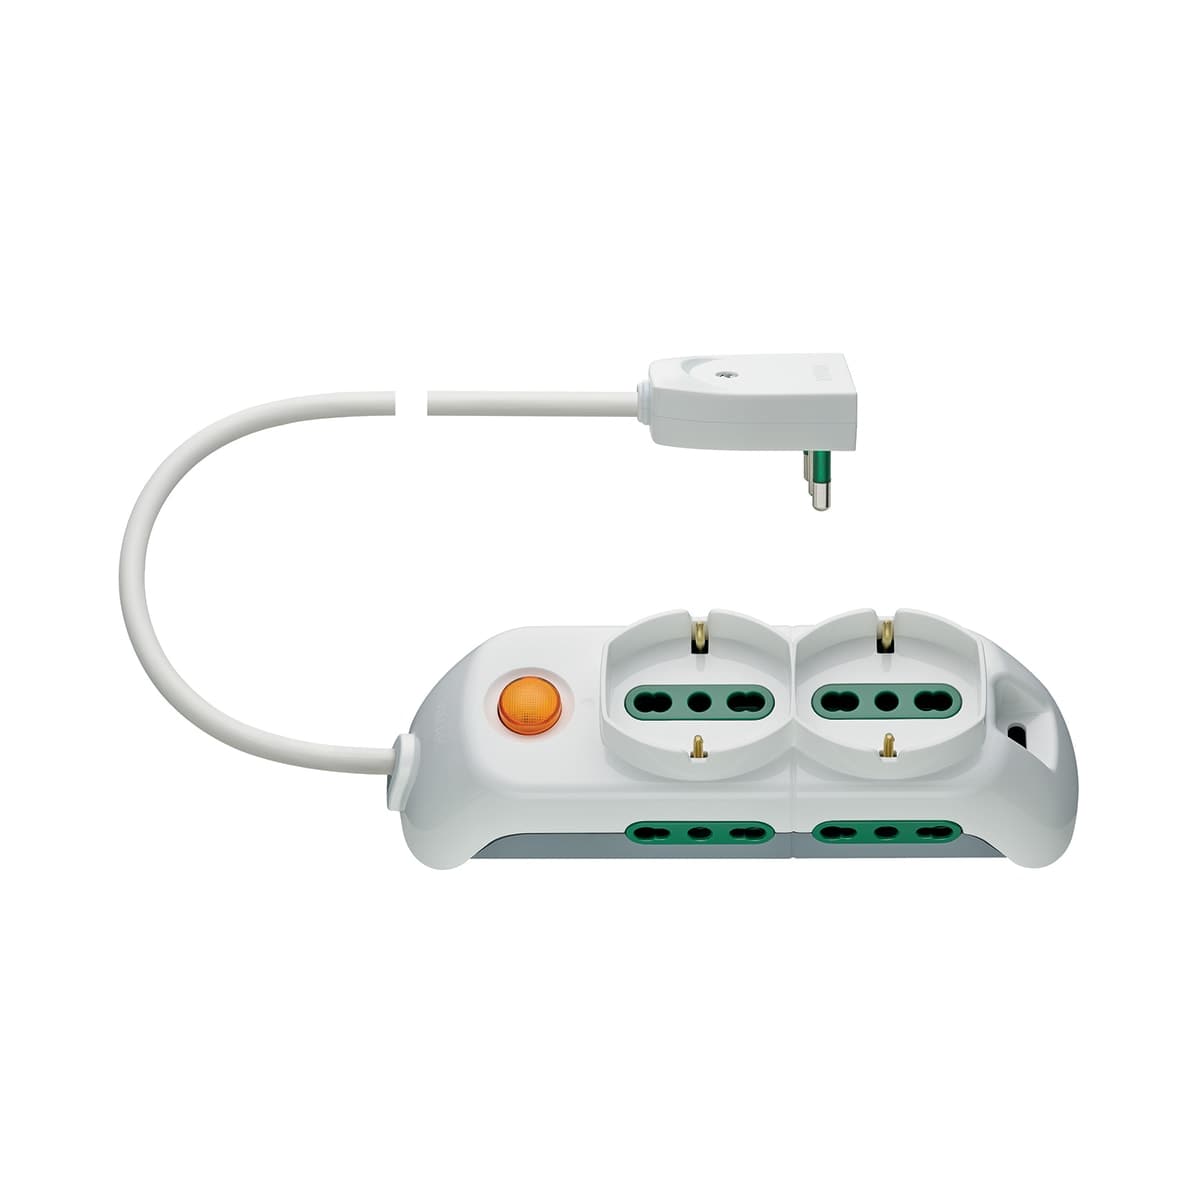 MULTISOCKET 16A PLUG 6 SOCKETS 2 UNIVERSAL 4 10/16A SWITCH CABLE 3 M WHITE